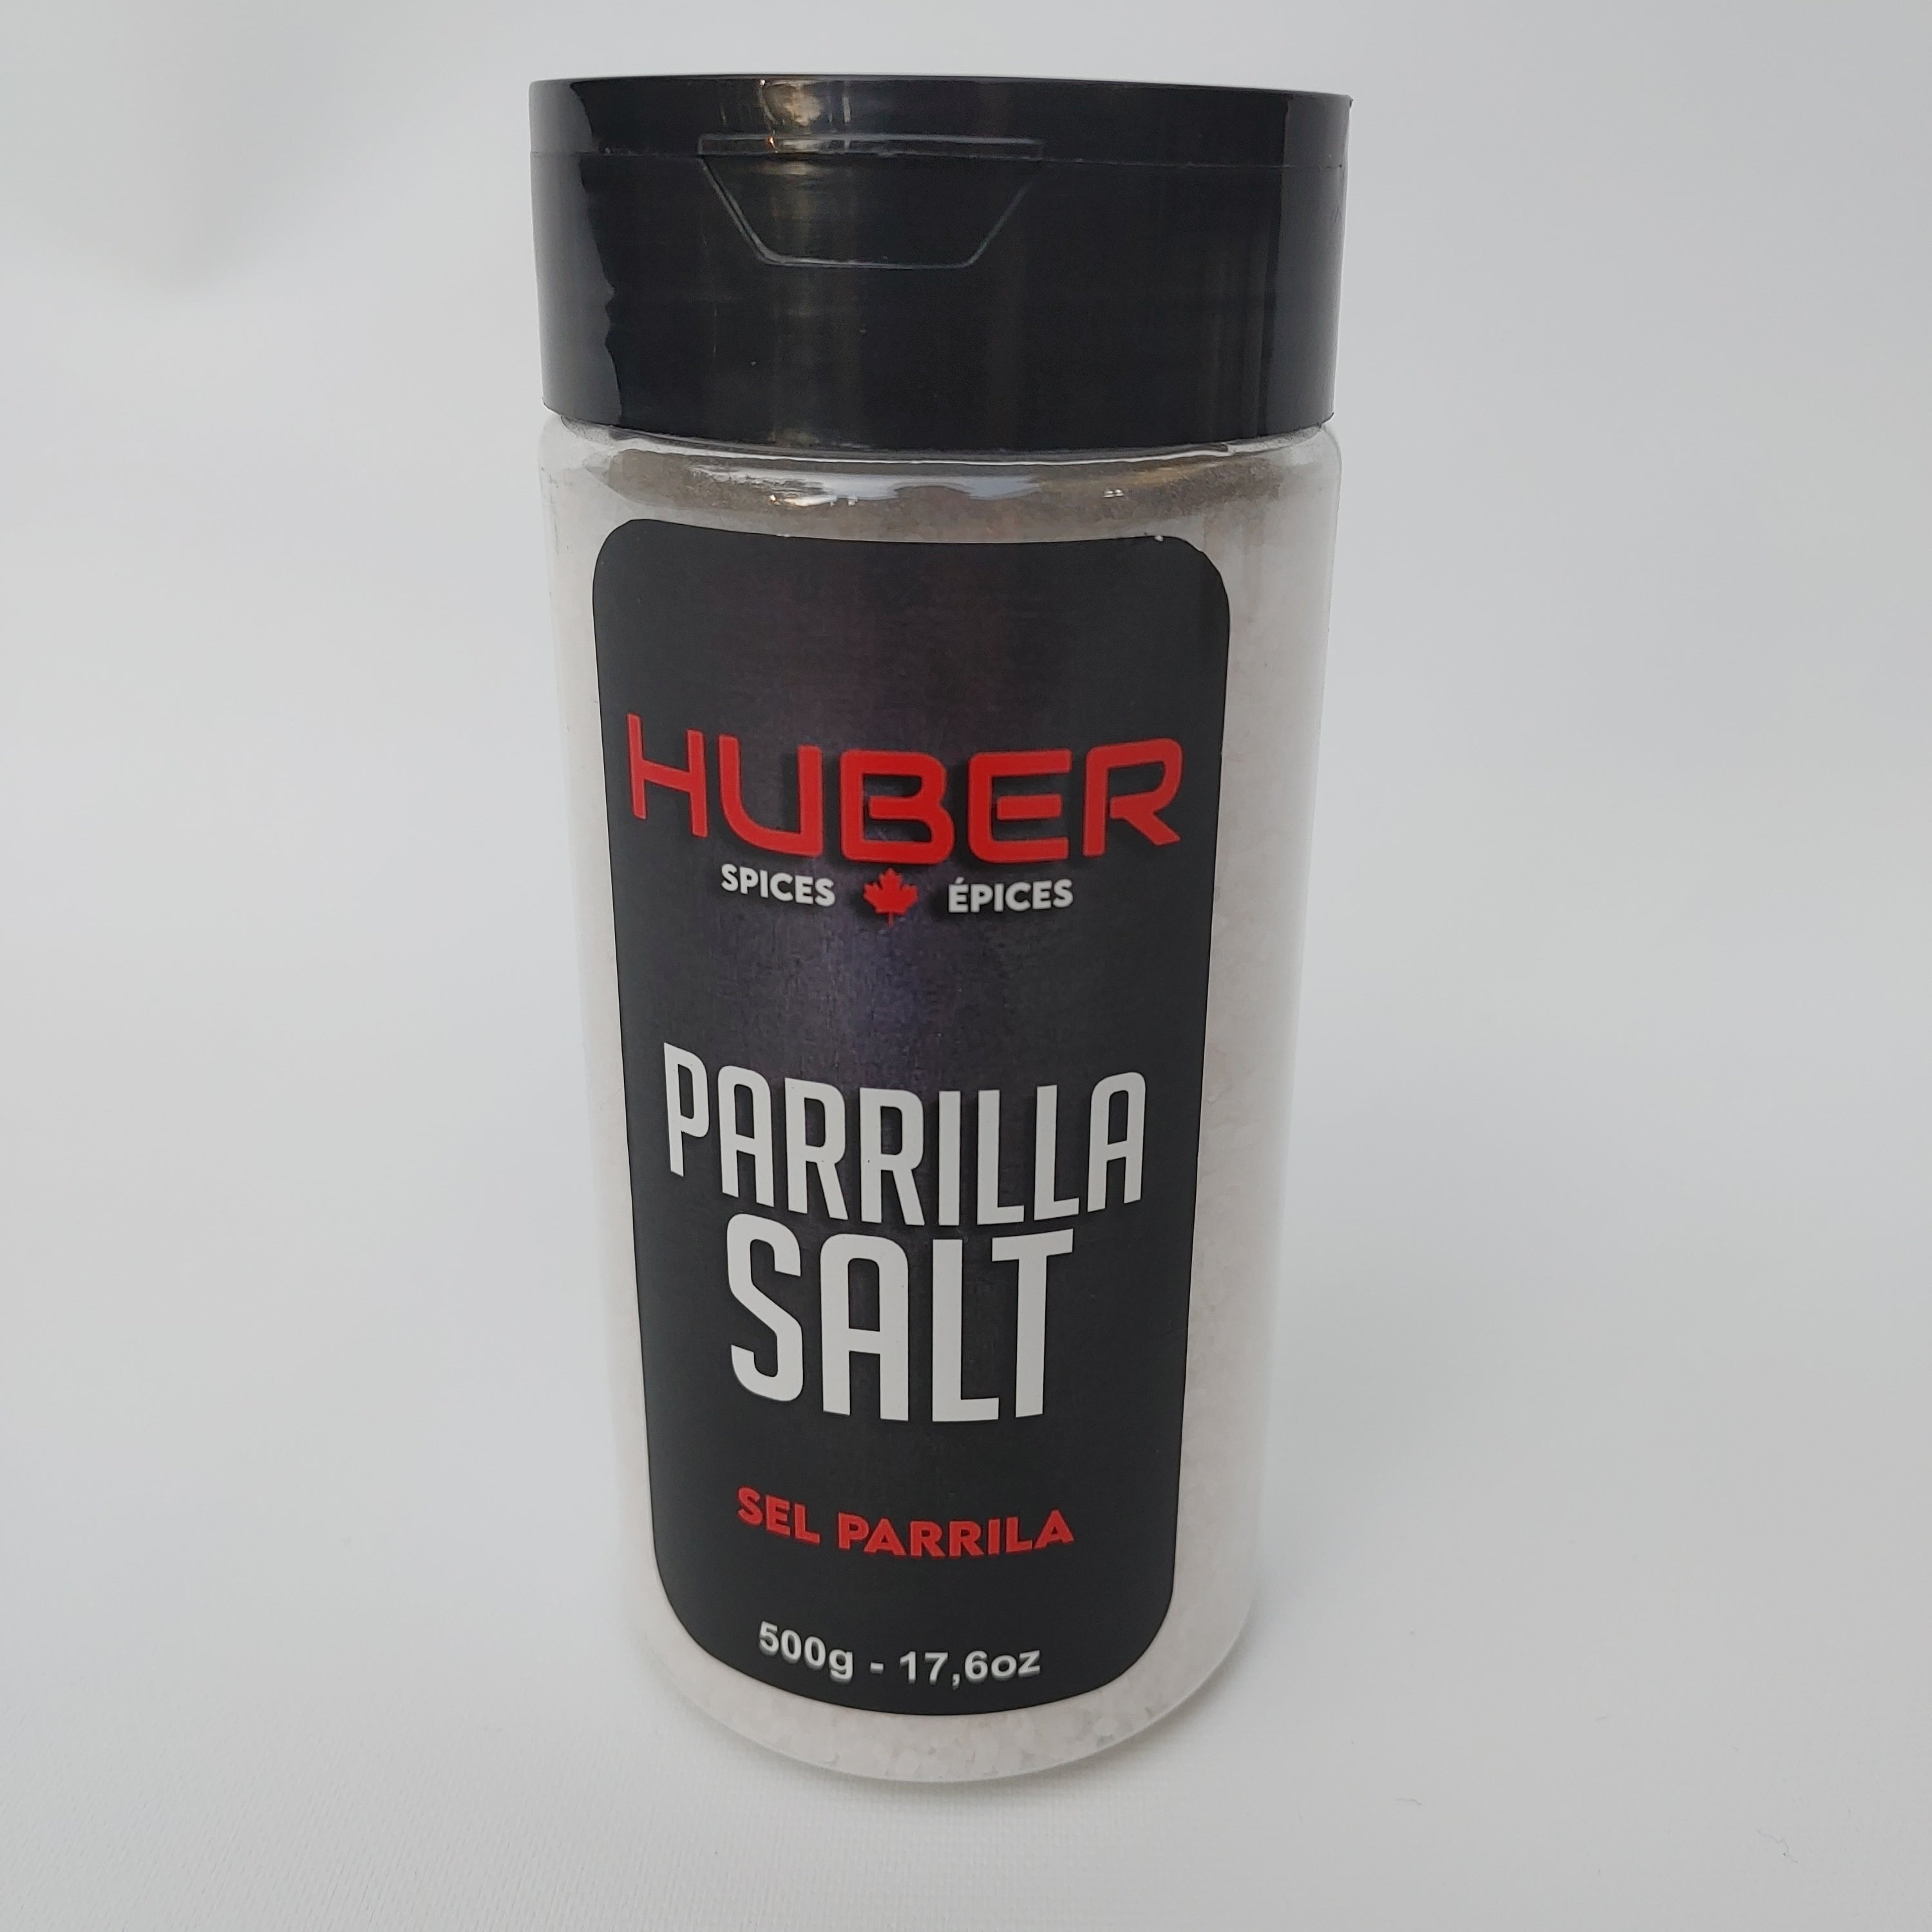 HUBER - Parilla Salt - FINAL SALE - EXPIRED or CLOSE TO EXPIRY